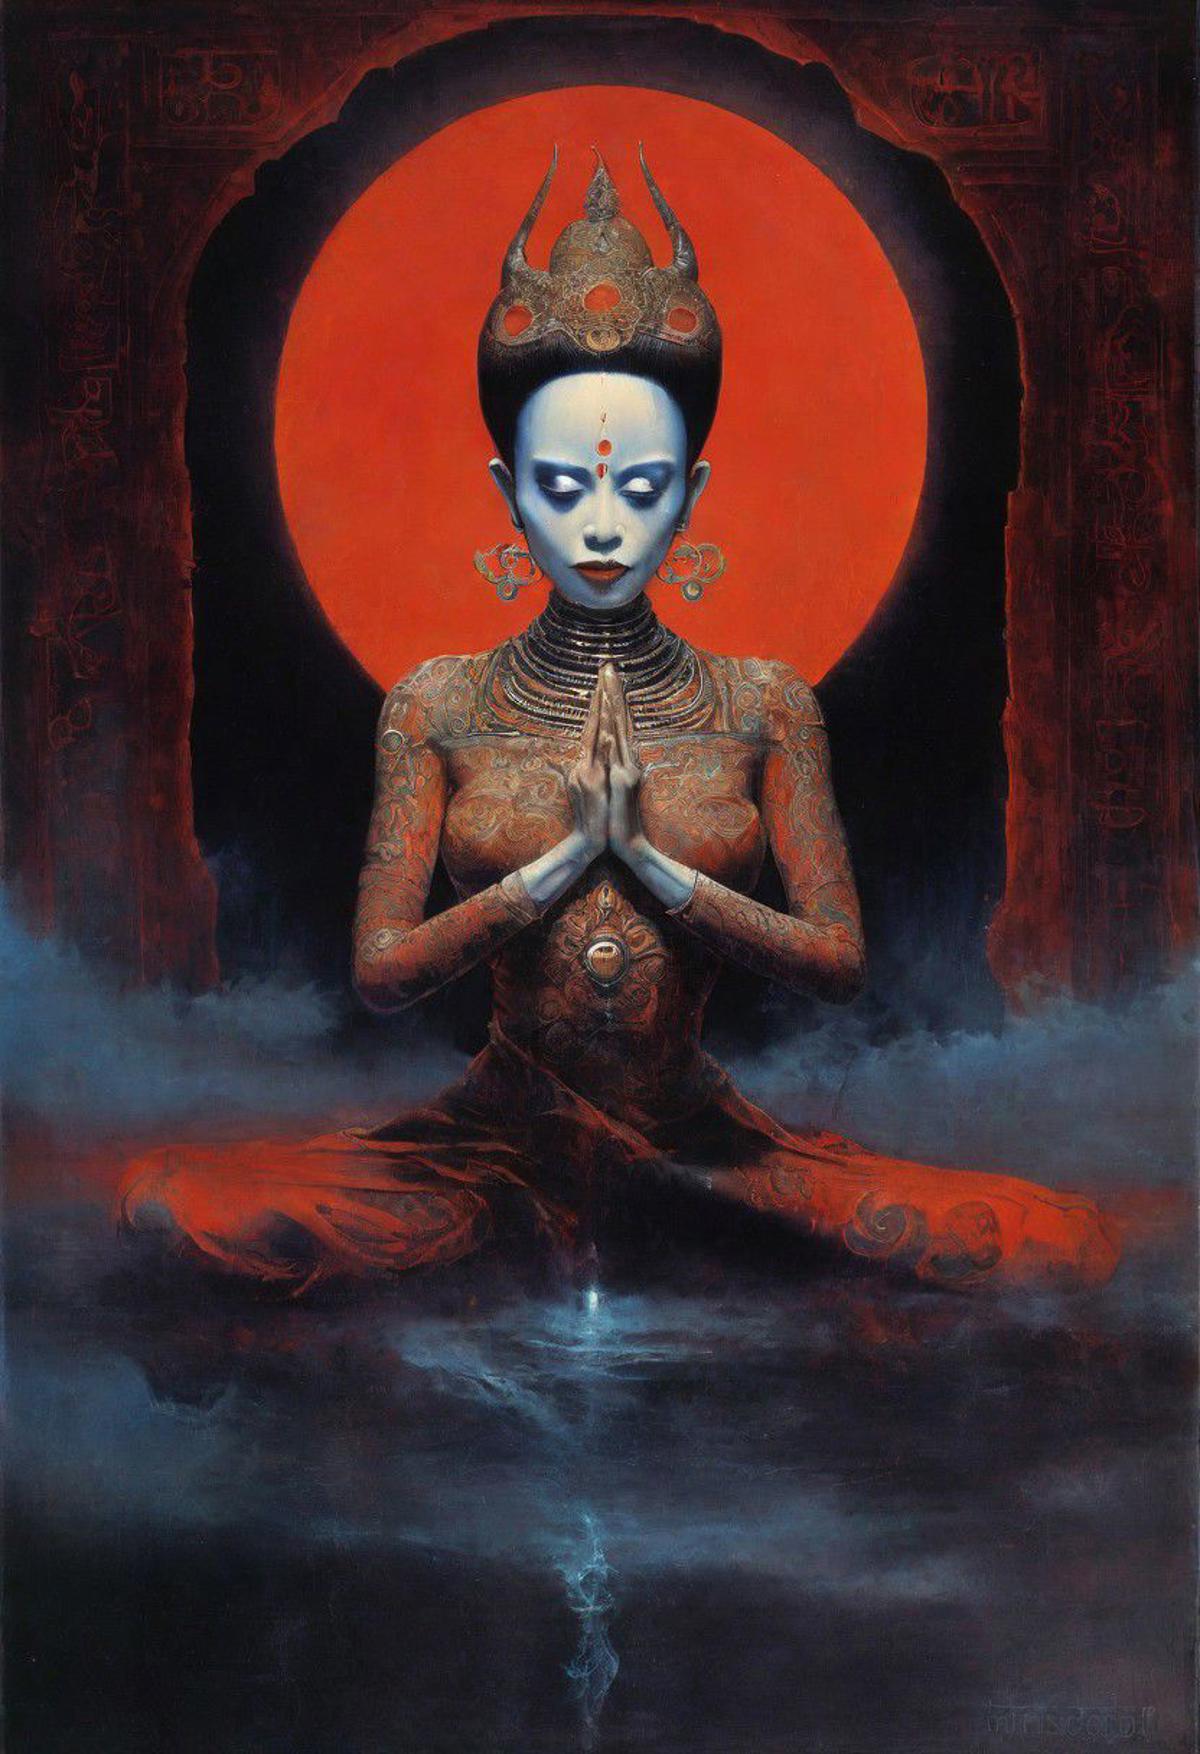 Bhairavi Devi Hindu Art Inspired Beautiful  Women with Intense Emotions image by oliviervinet050670